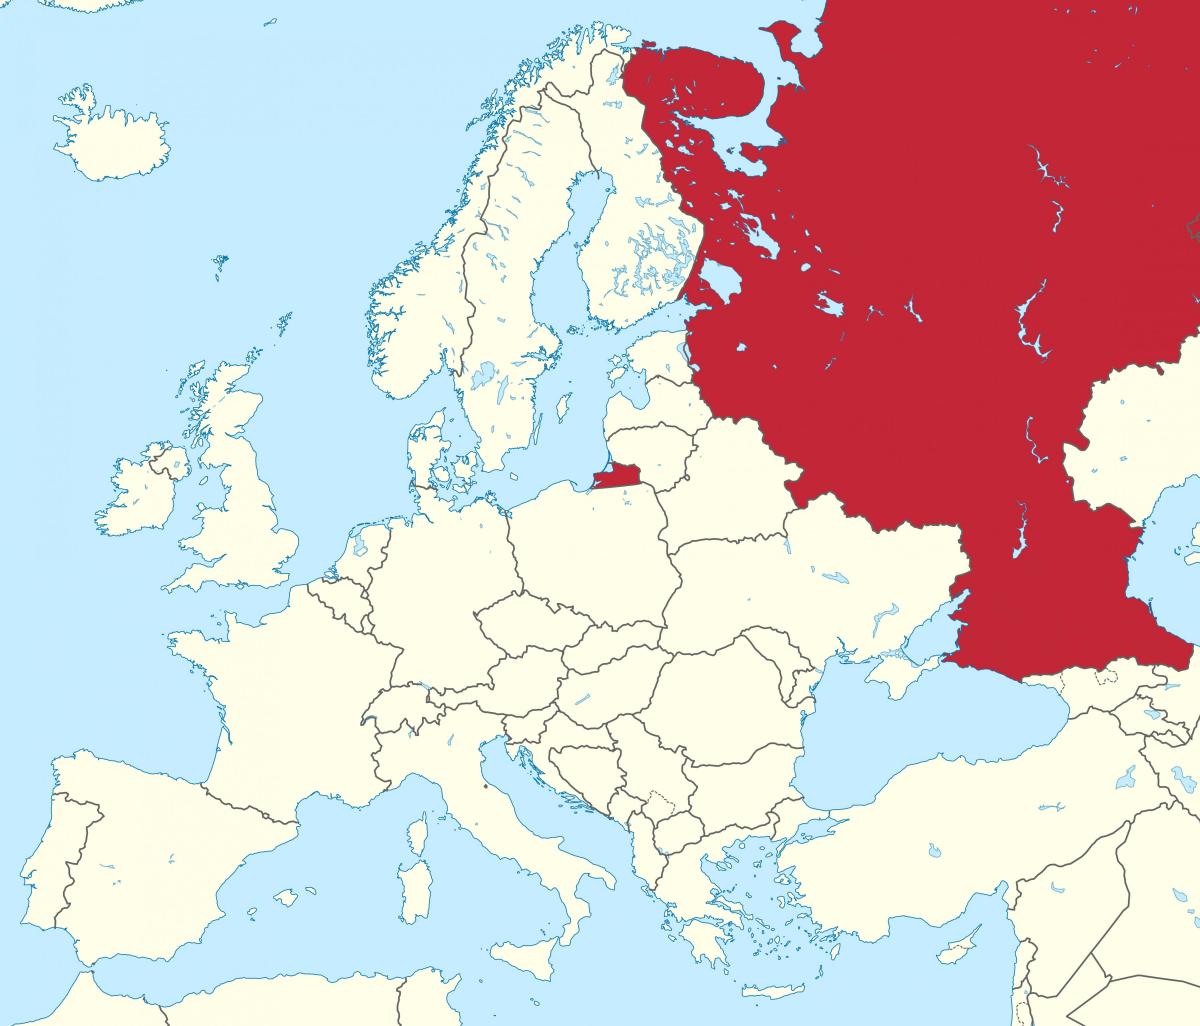 Russia location on the Europe map